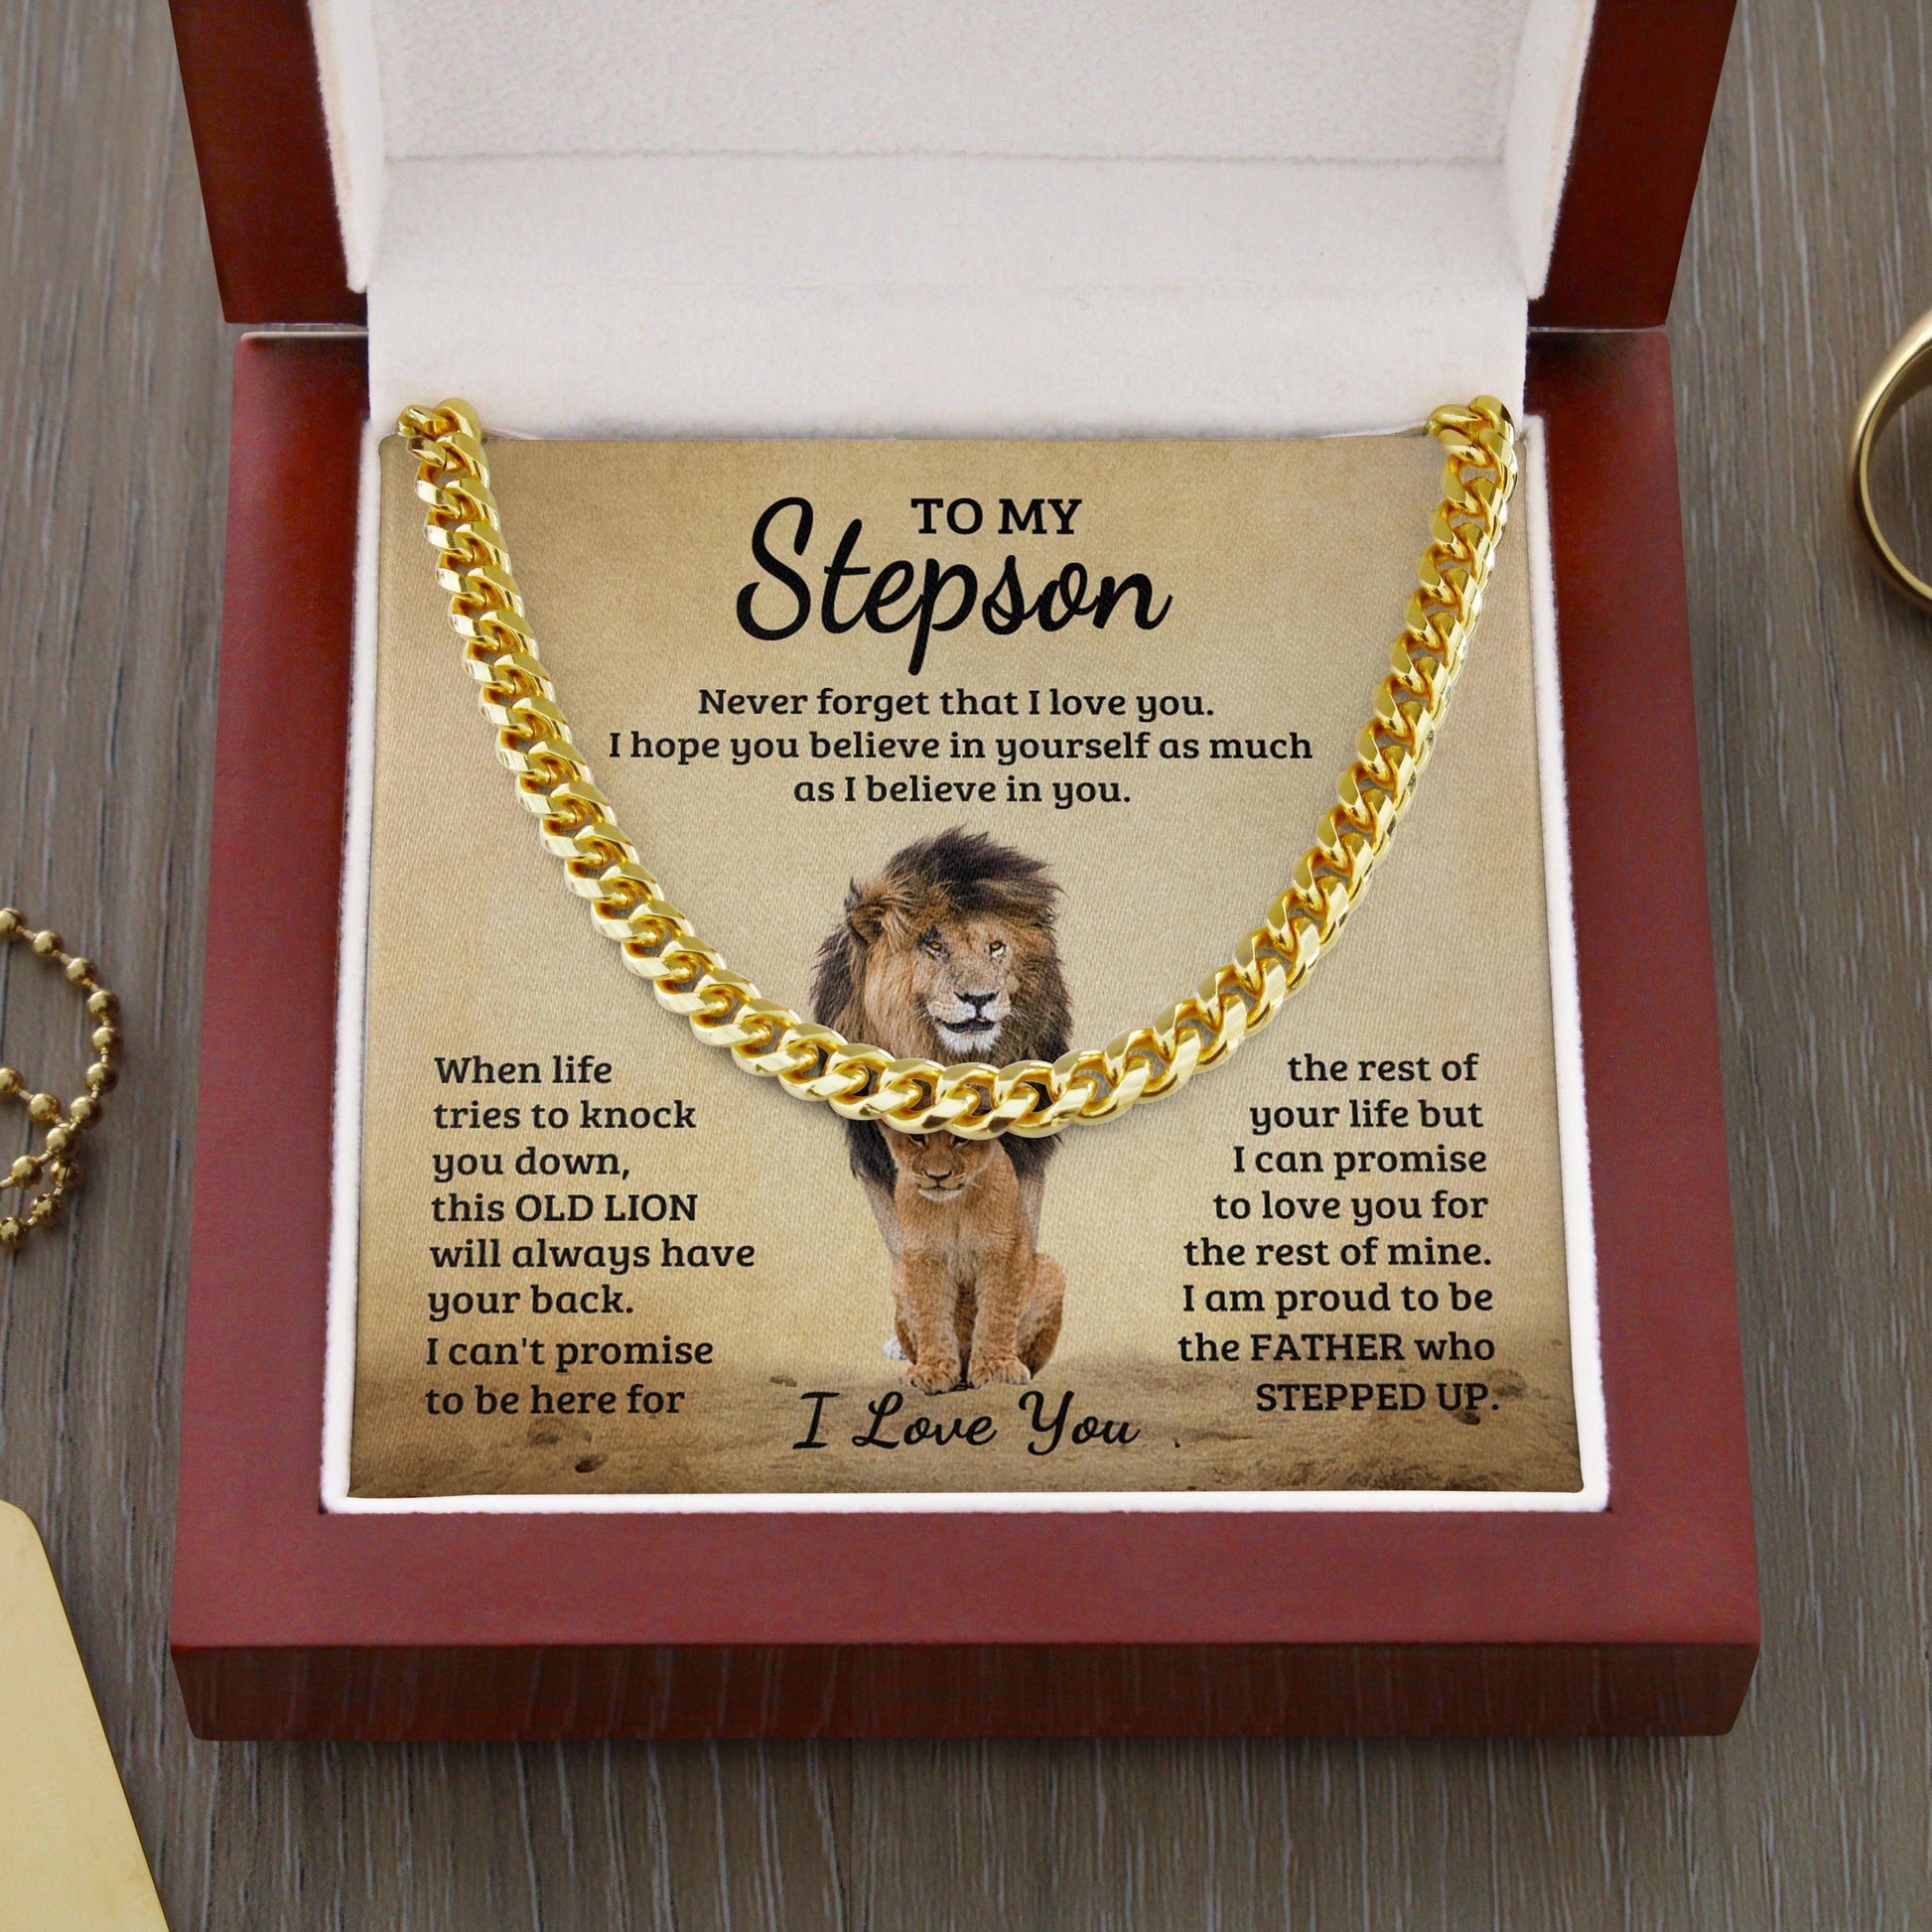 Jewelry gifts Stepson - My Lion - Cuban Link Chain - Belesmé - Memorable Jewelry Gifts 